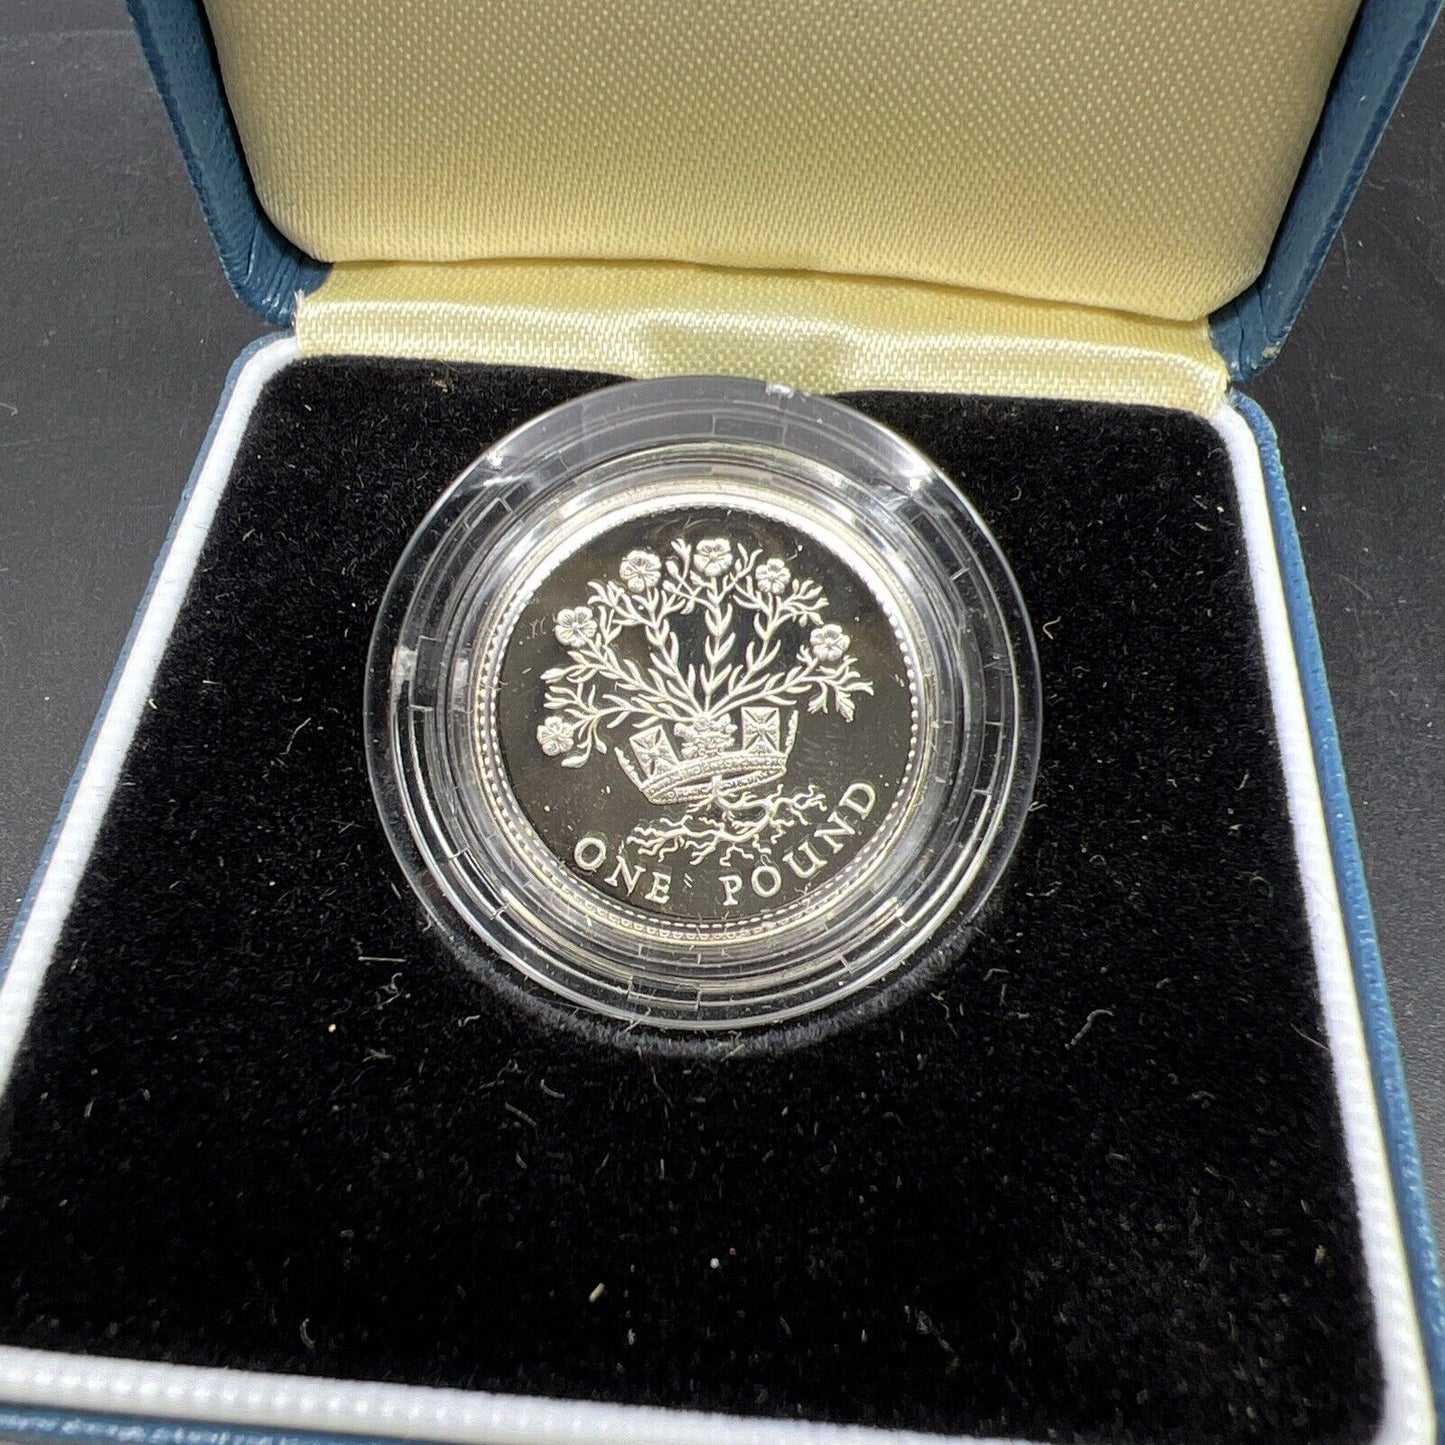 1986 UK Sterling Silver Proof One Pound Coin w/ Box & COA